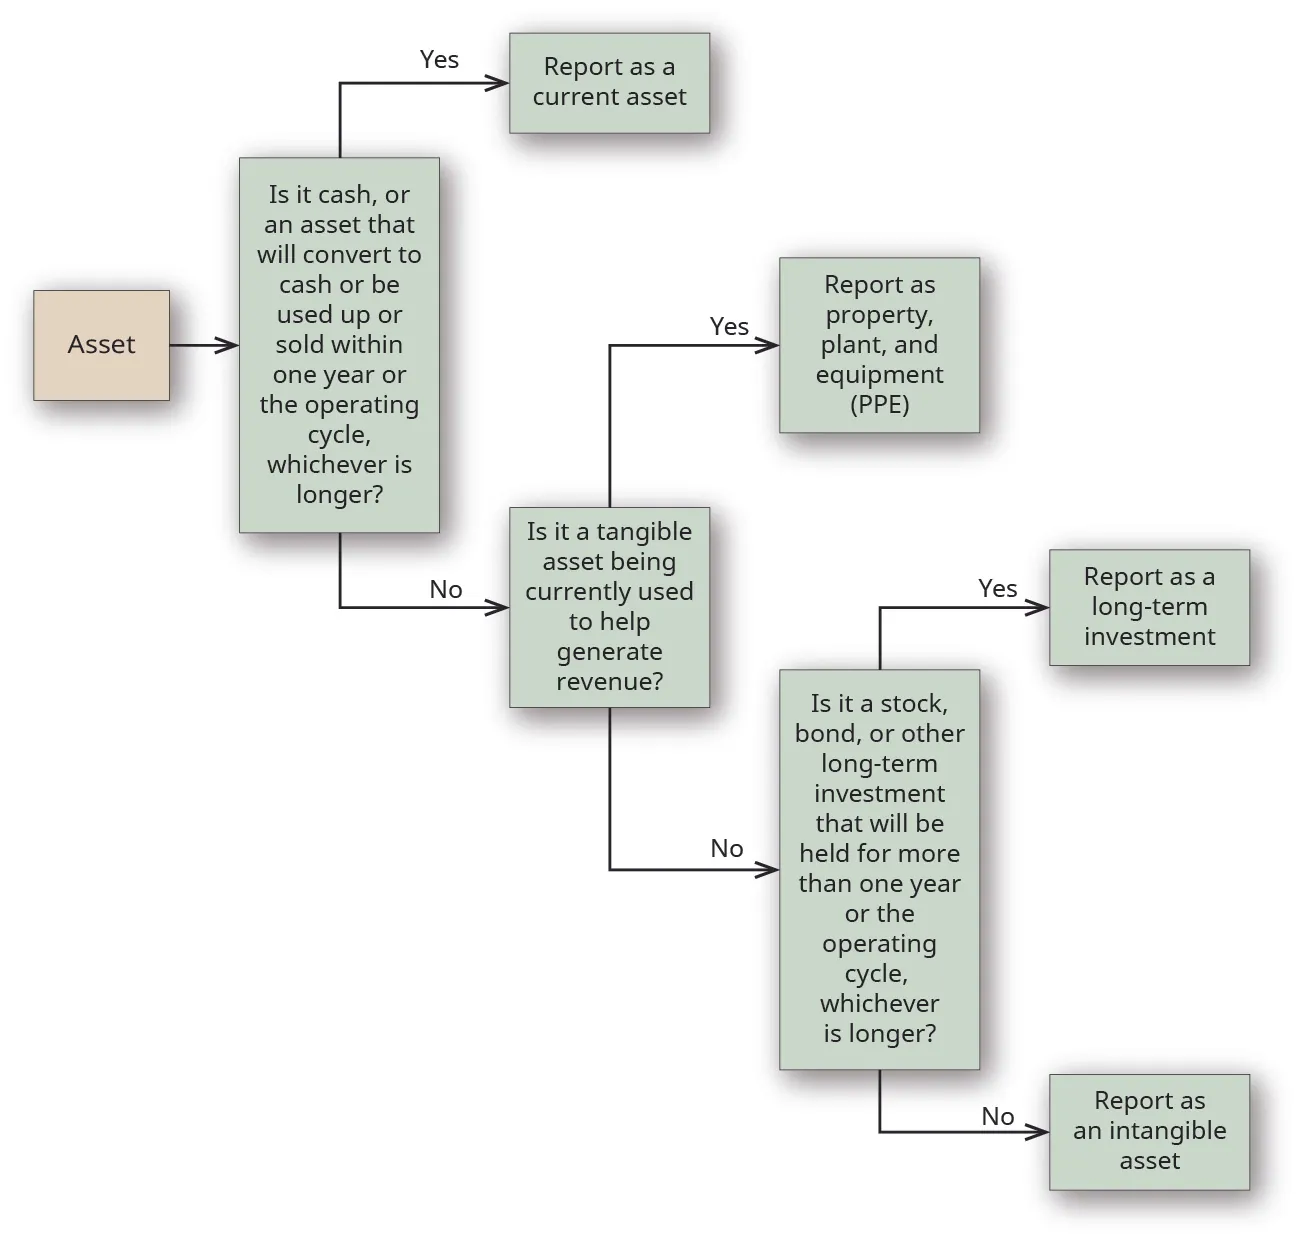 Flowchart starting with a box labeled “Asset” pointing to the question, “Is it cash, or an asset that will convert to cash or be used up or sold within one year or the operating cycle, whichever is longer?” If Yes, an arrow points to a box that says, “Report as a current asset.” If No, an arrow points to a box that asks, “Is it a tangible asset being currently used to help generate revenue?” If Yes, an arrow points to a box that says, “Report as property, plant, and equipment (PPE). If No, an arrow points to a box that asks, “Is it a stock, bond, or other long-term investment that will be held for more than one year or the operating cycle, whichever is longer?” If Yes, an arrow points to a box that says, “Report as a long-term investment.” If No, an arrow points to a box that says, “Report as an intangible asset.”